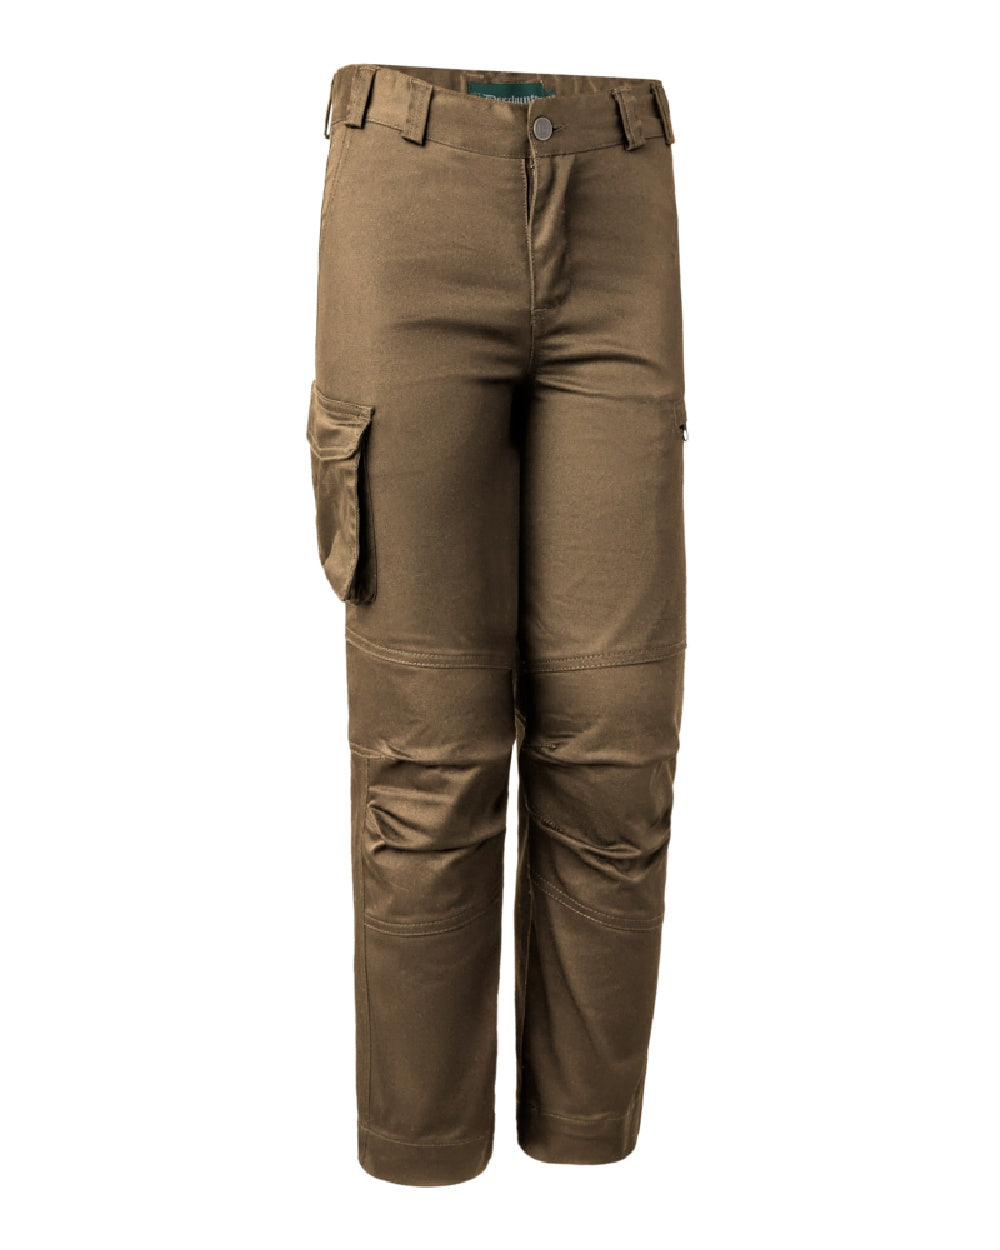 Deerhunter Youth Traveler Trousers in Hickory 